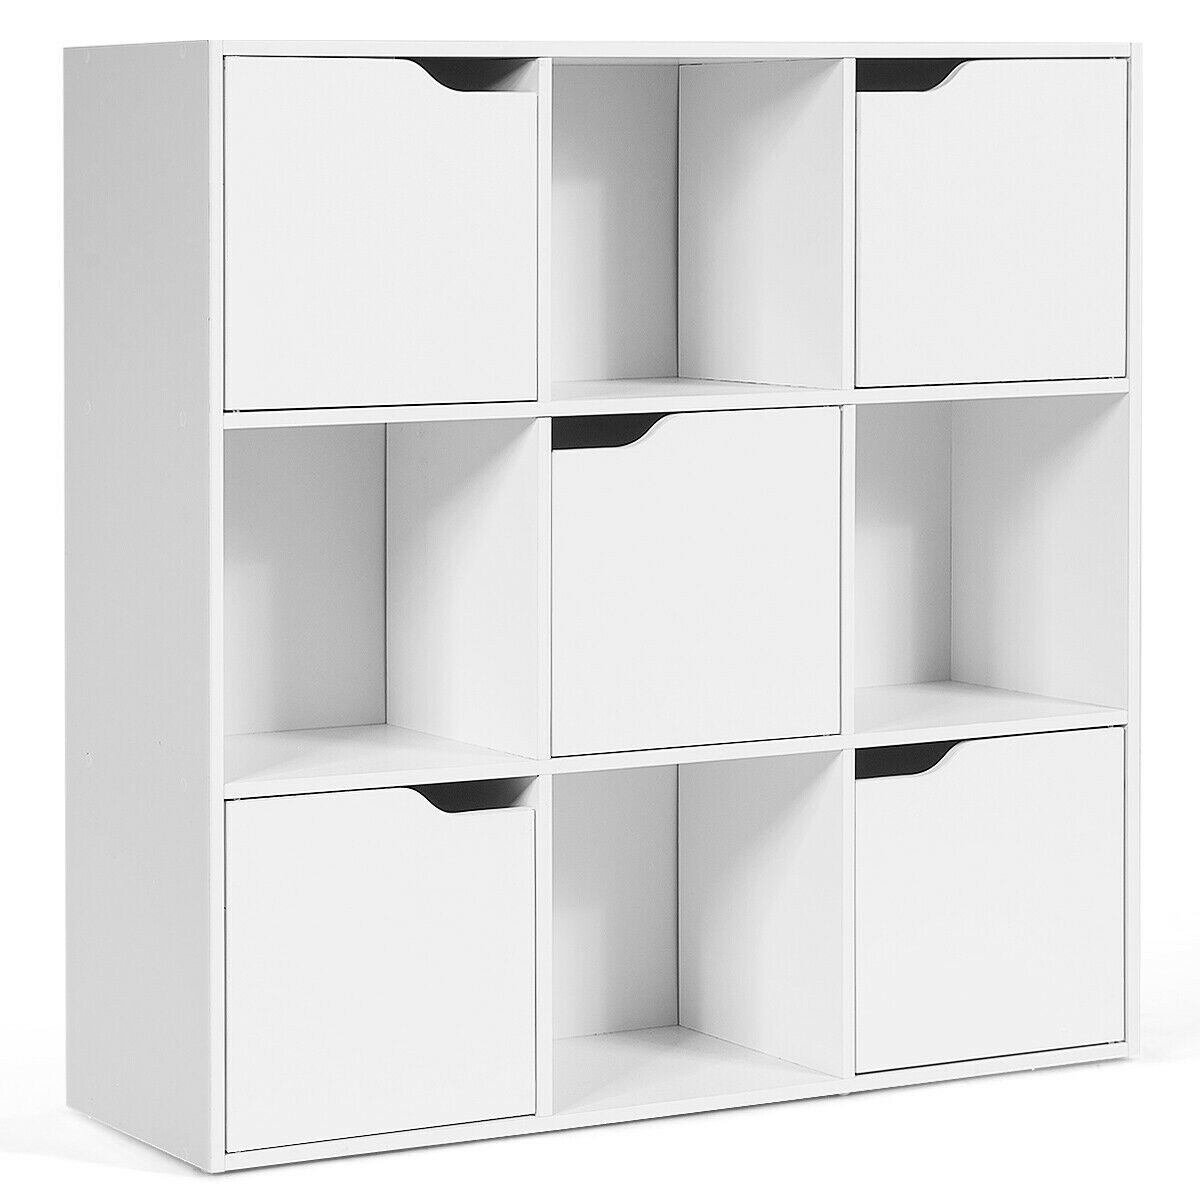 Gymax 9 Cube Bookcase Cabinet Wood Bookcase Storage Shelves Room Divider Organization